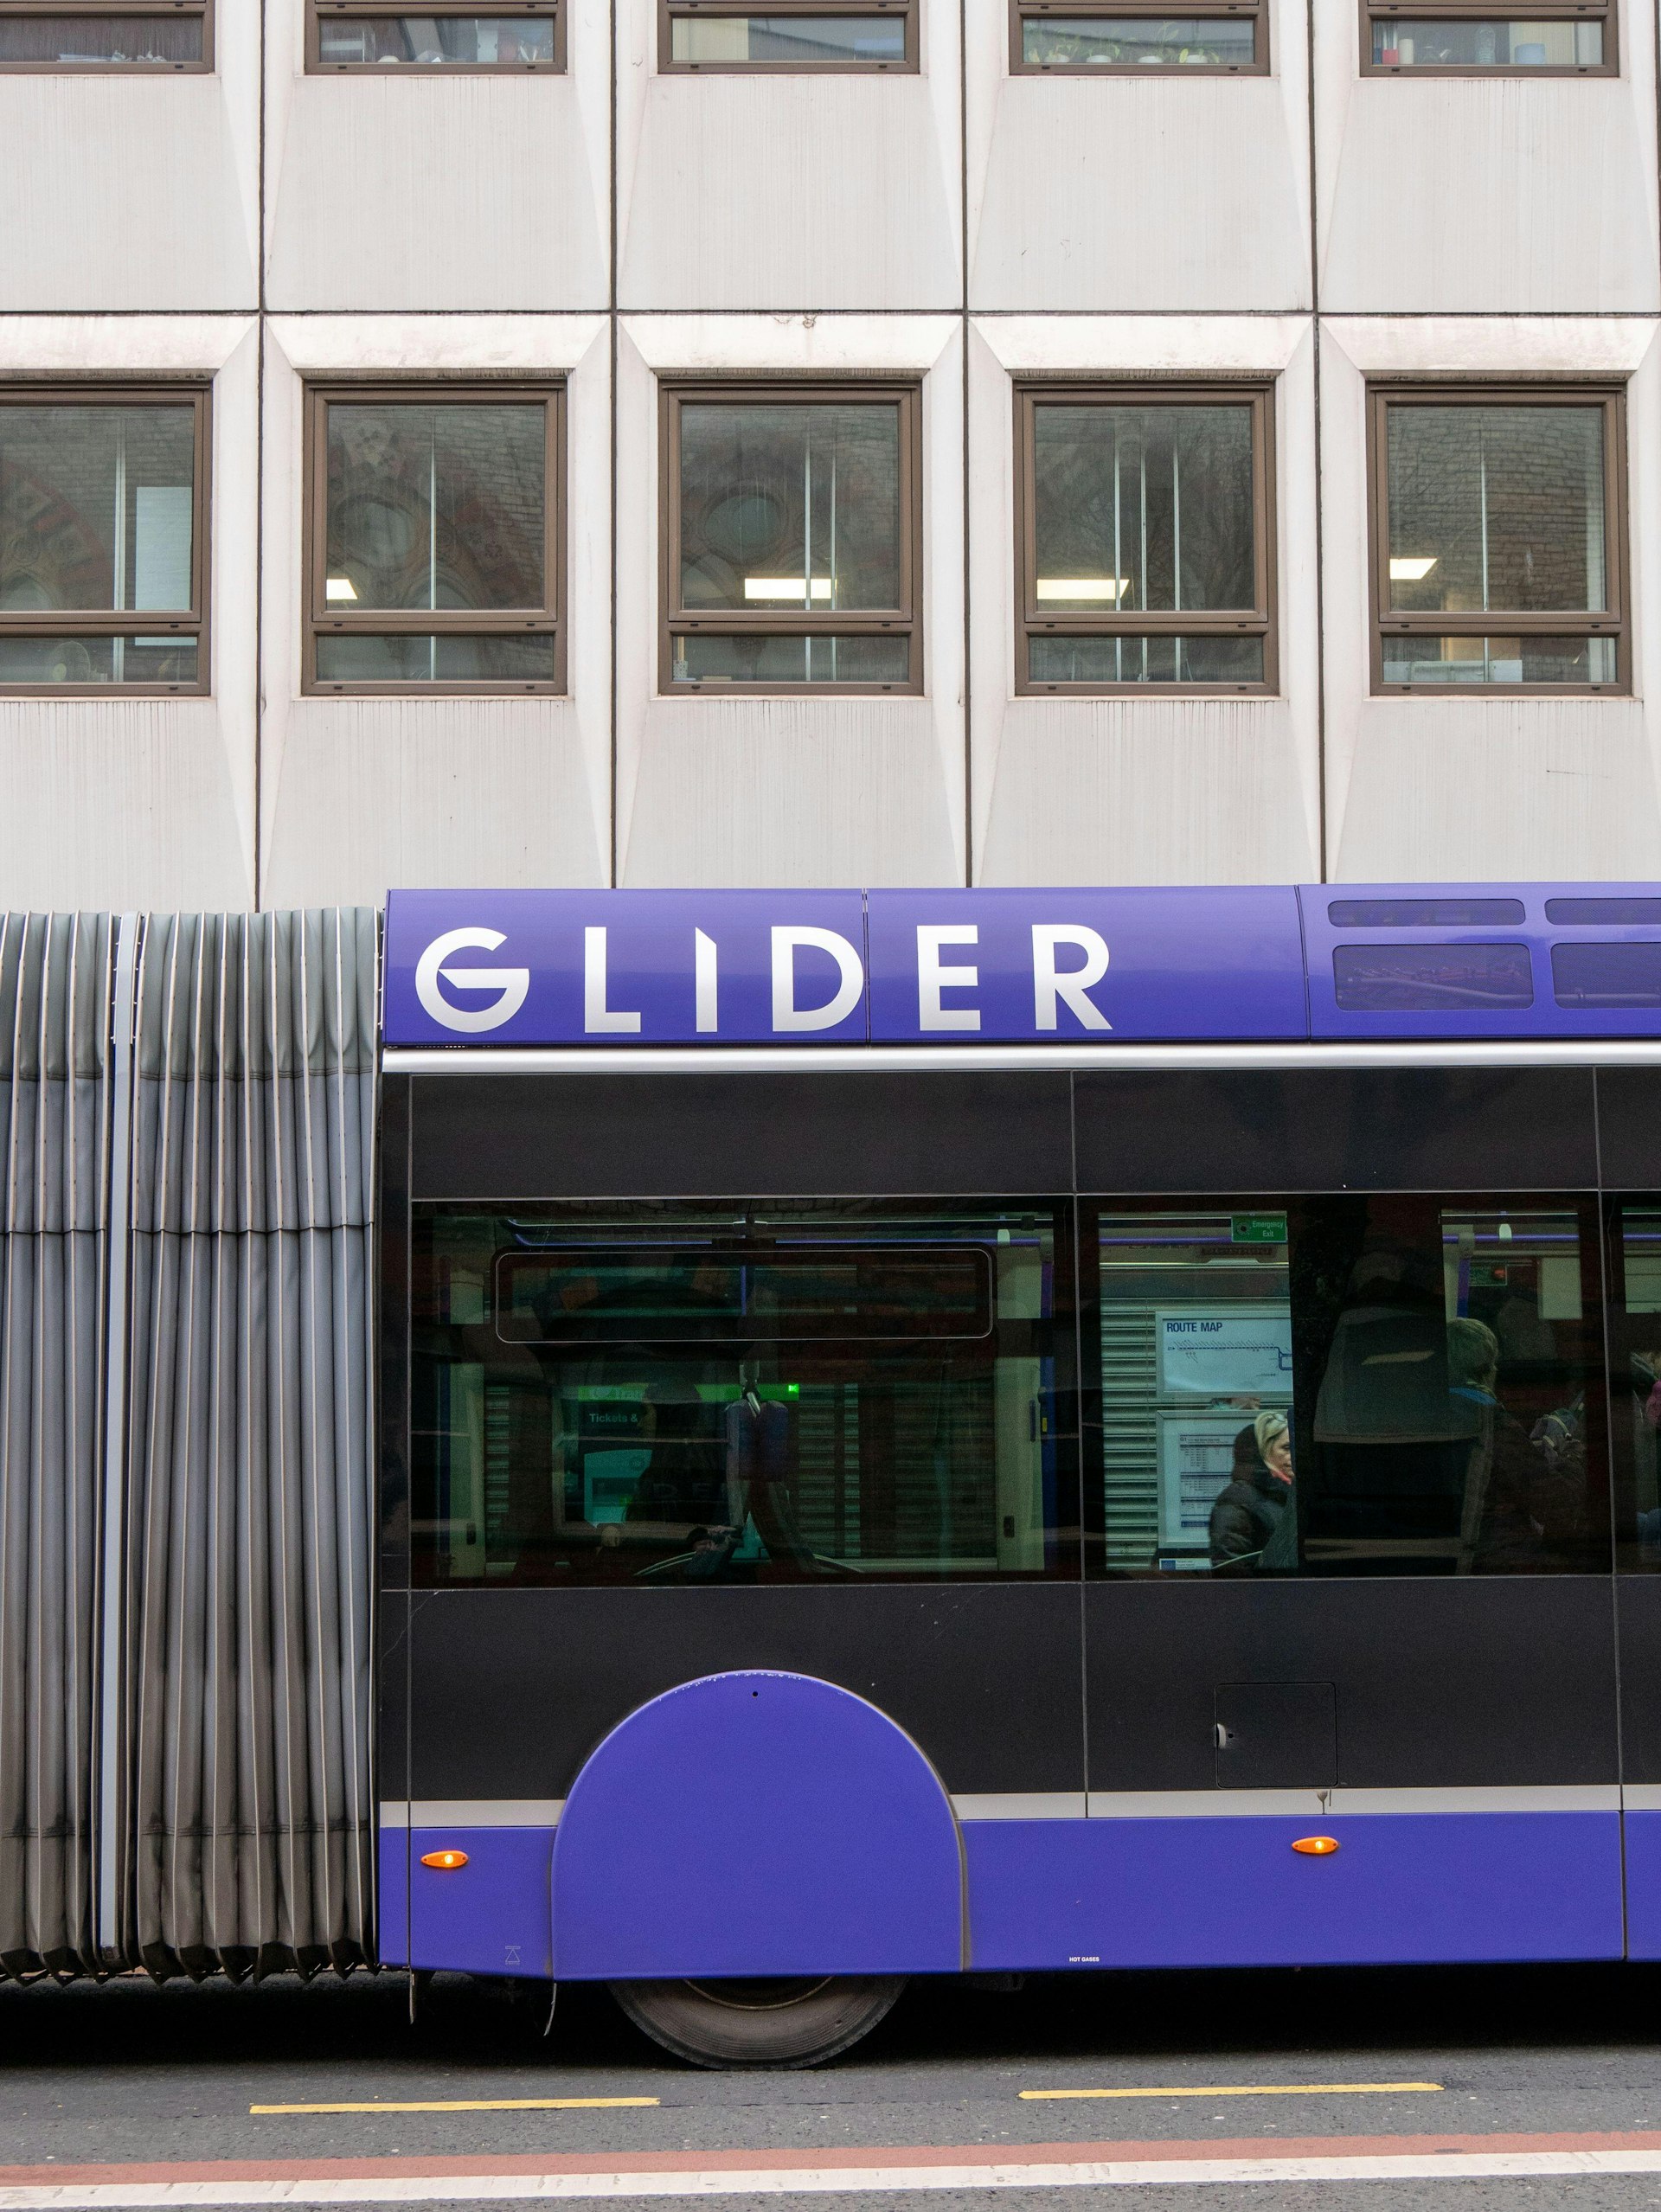 The side of a "bendy bus" service in Belfast with the word "Glider" written on it